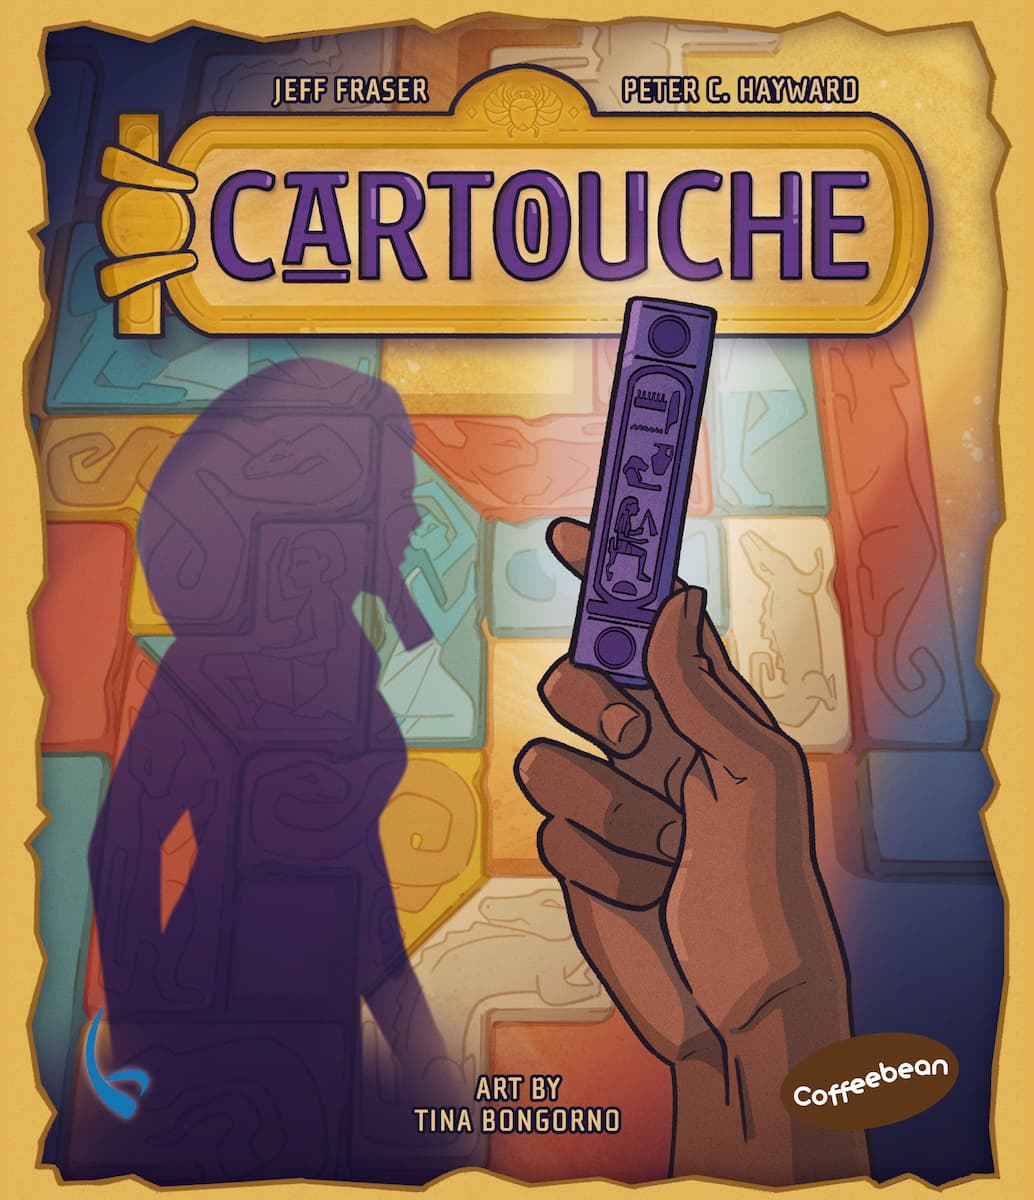 Cartouche the board game was manufactured by Boda Games Manufacturing.